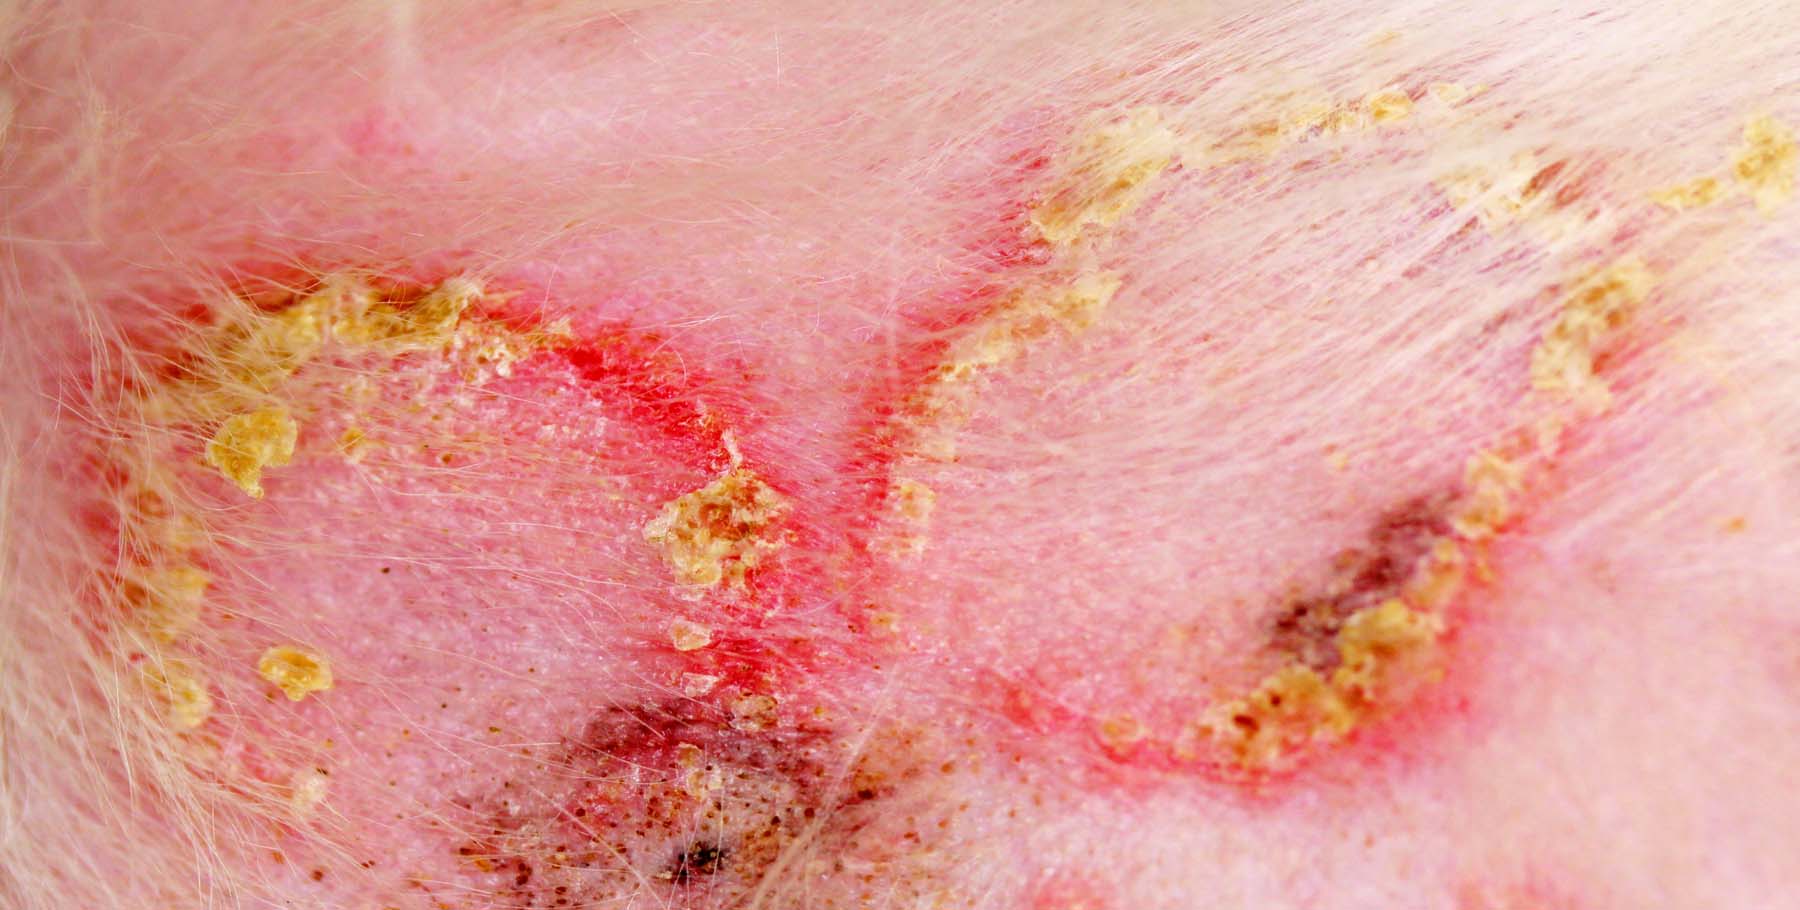 Dermatophytosis (Ringworm) or Superficial Bacterial Infection or Pemphigus Foliaceus